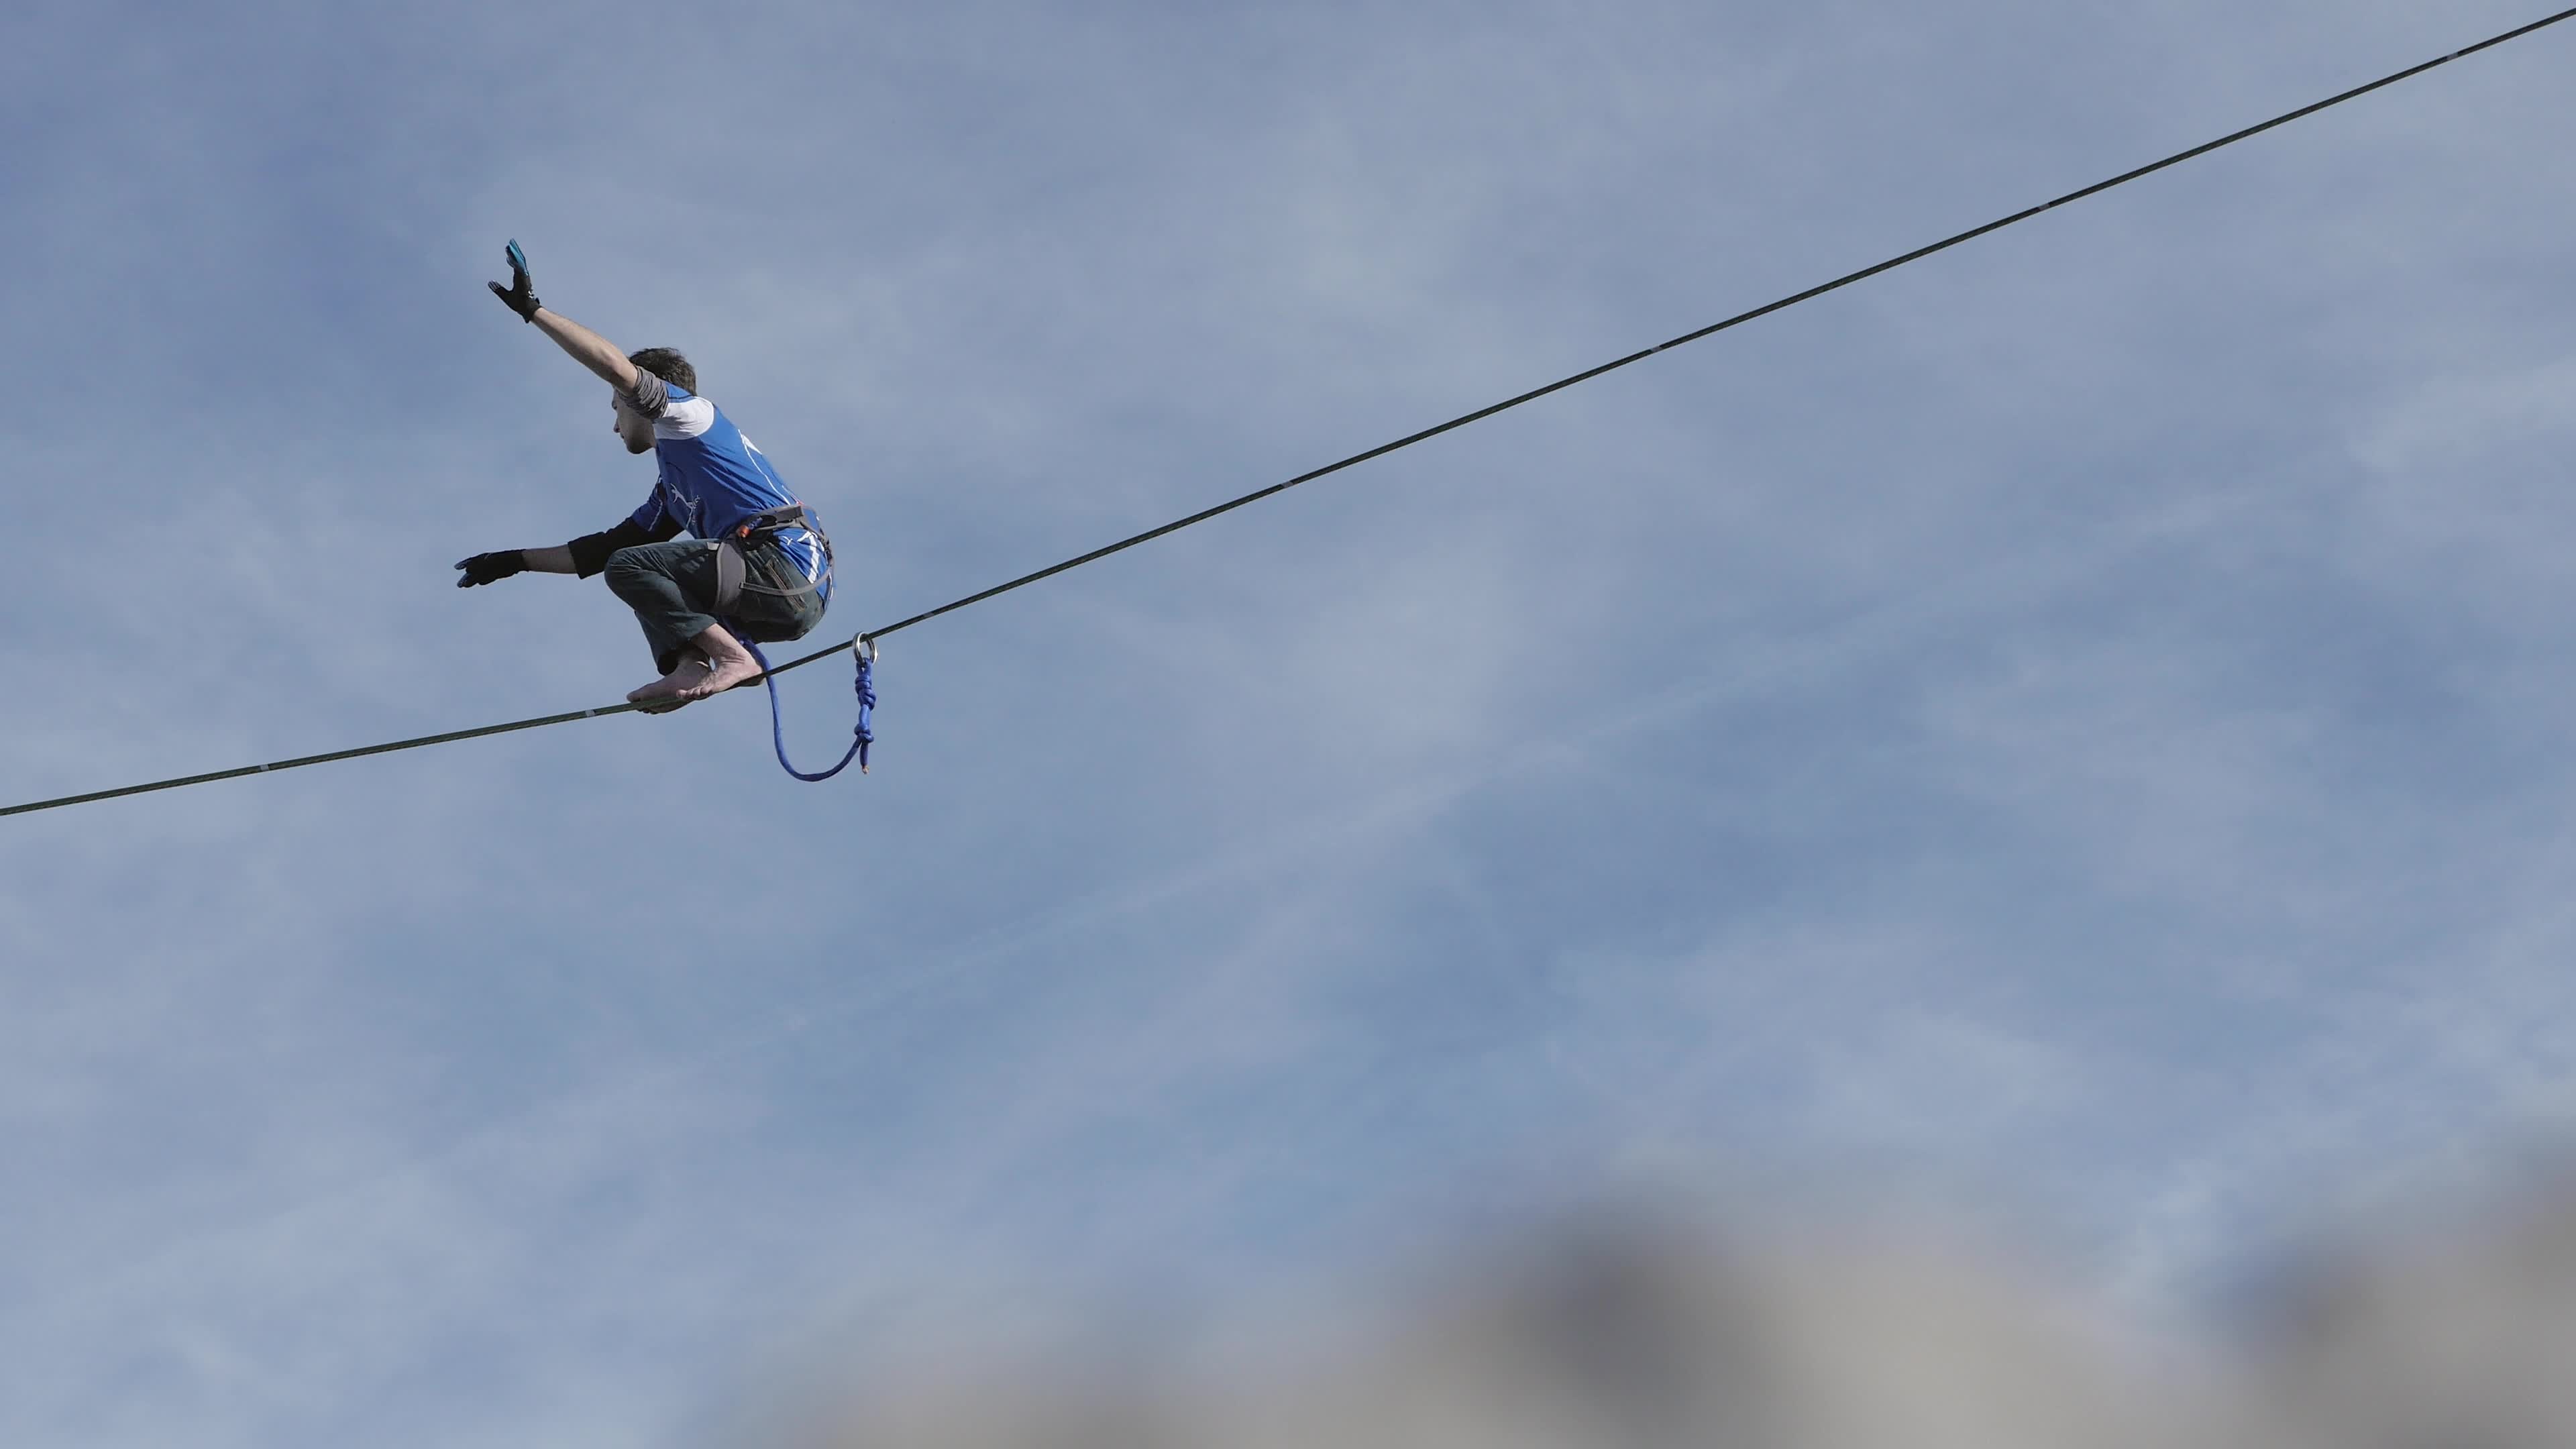 Slacklining: Walking on a rope at a high altitude, Highlining, Balancing while slacklining on a tightrope in the mountains. 3840x2160 4K Background.